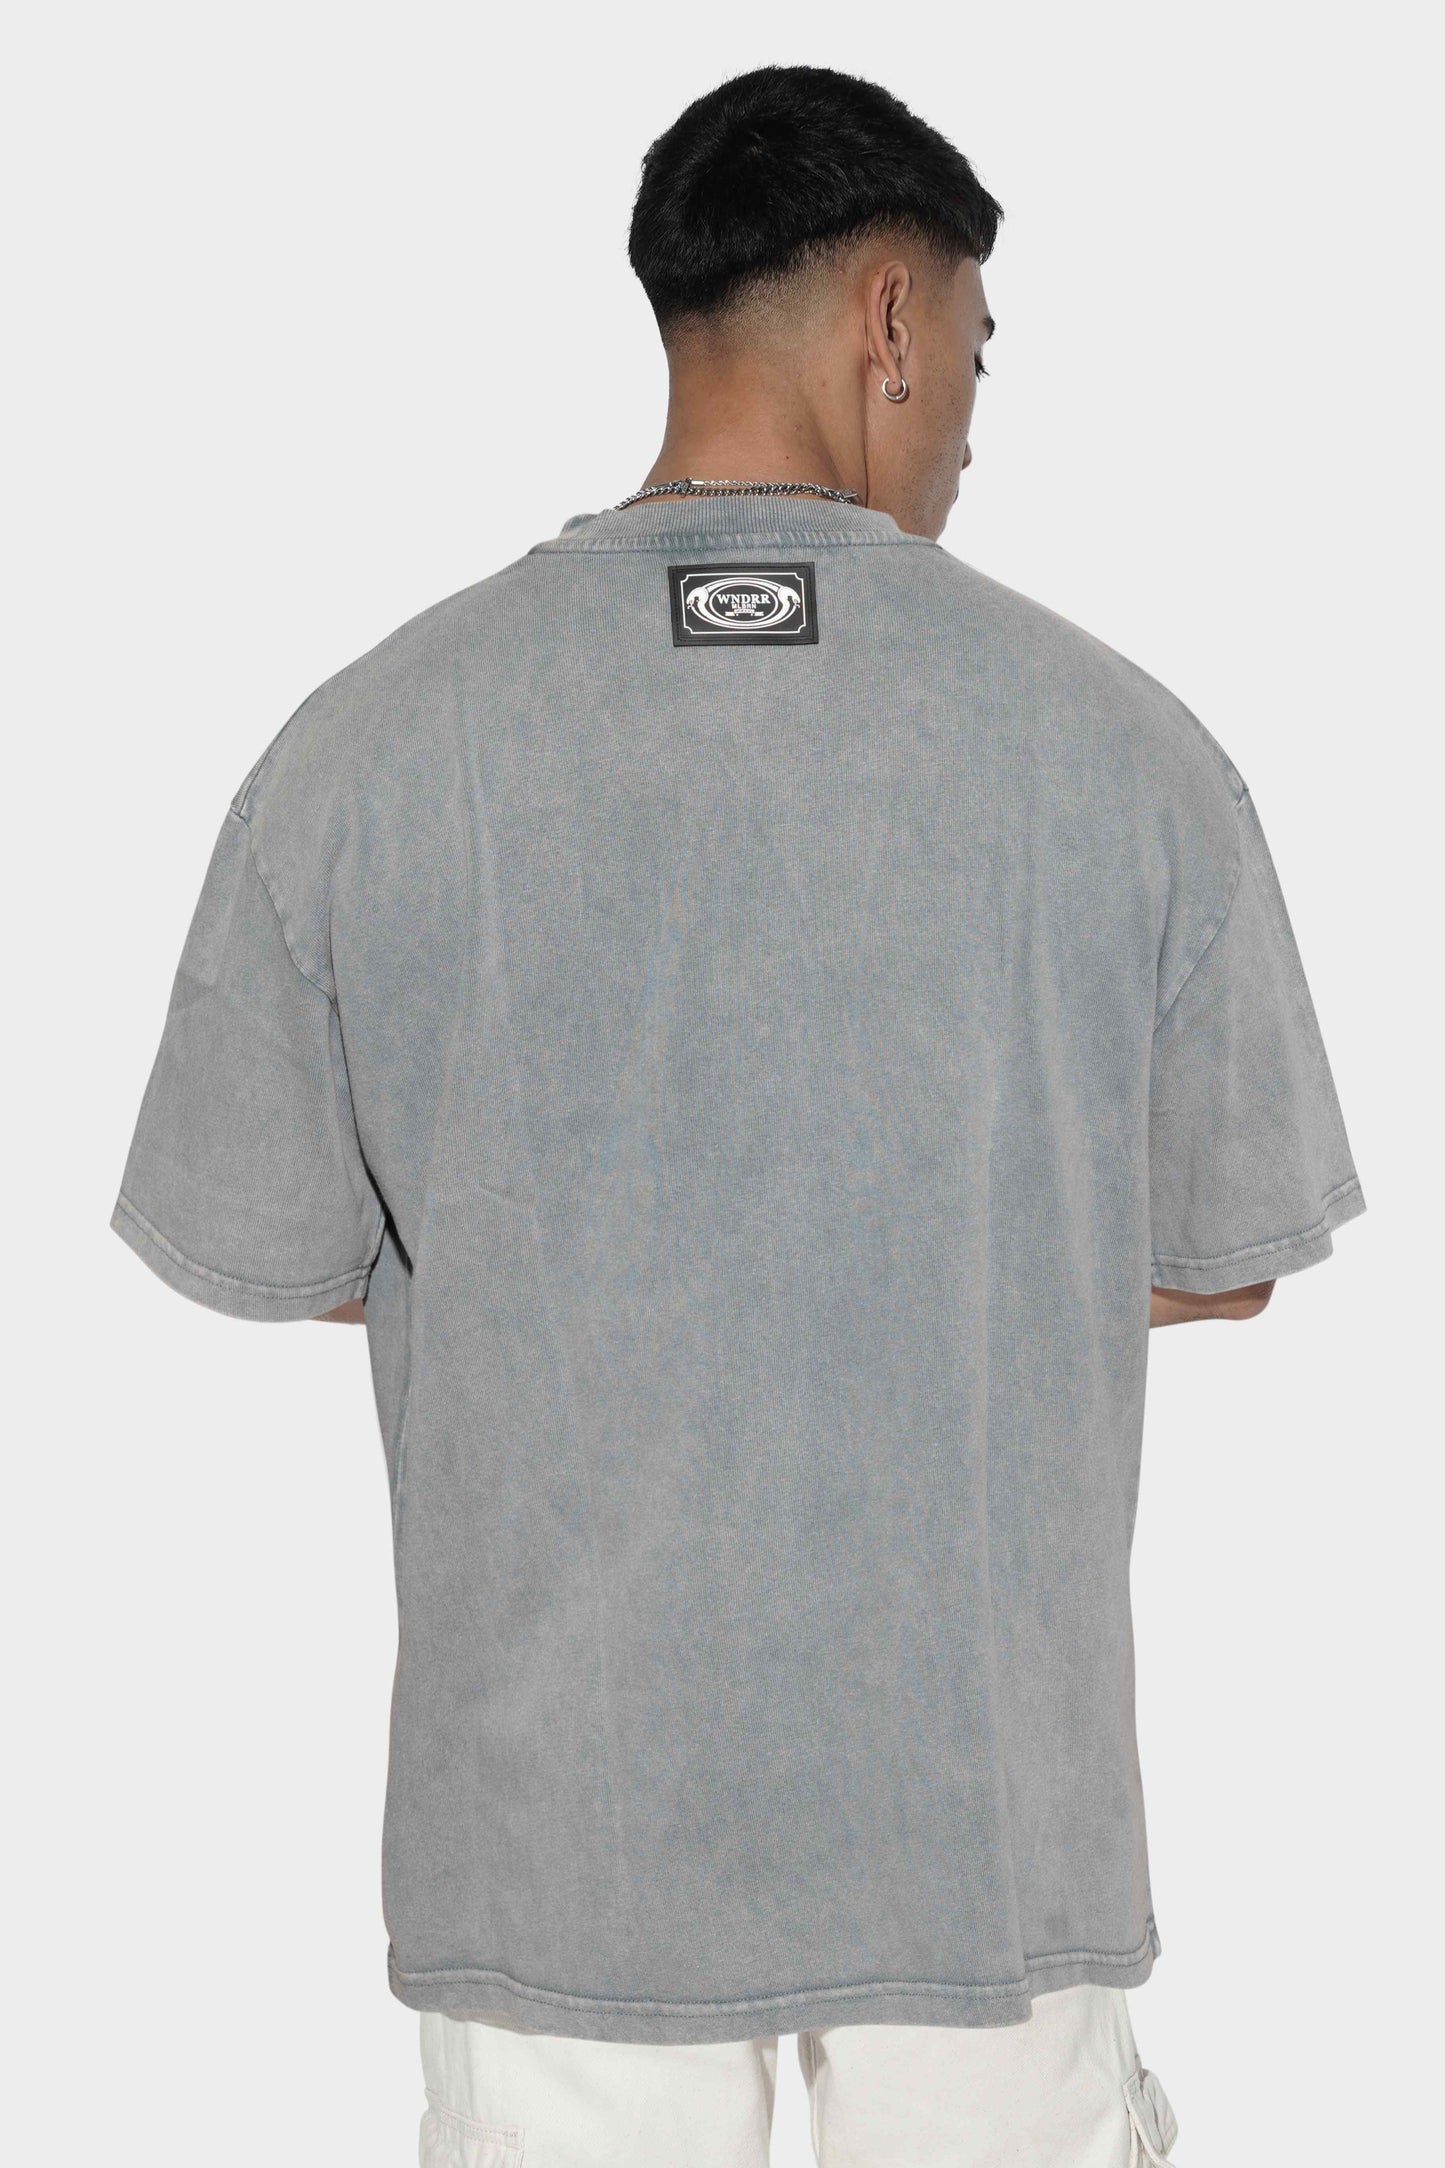 WNDRR Constrict Heavy Weight Tee Washed Grey S